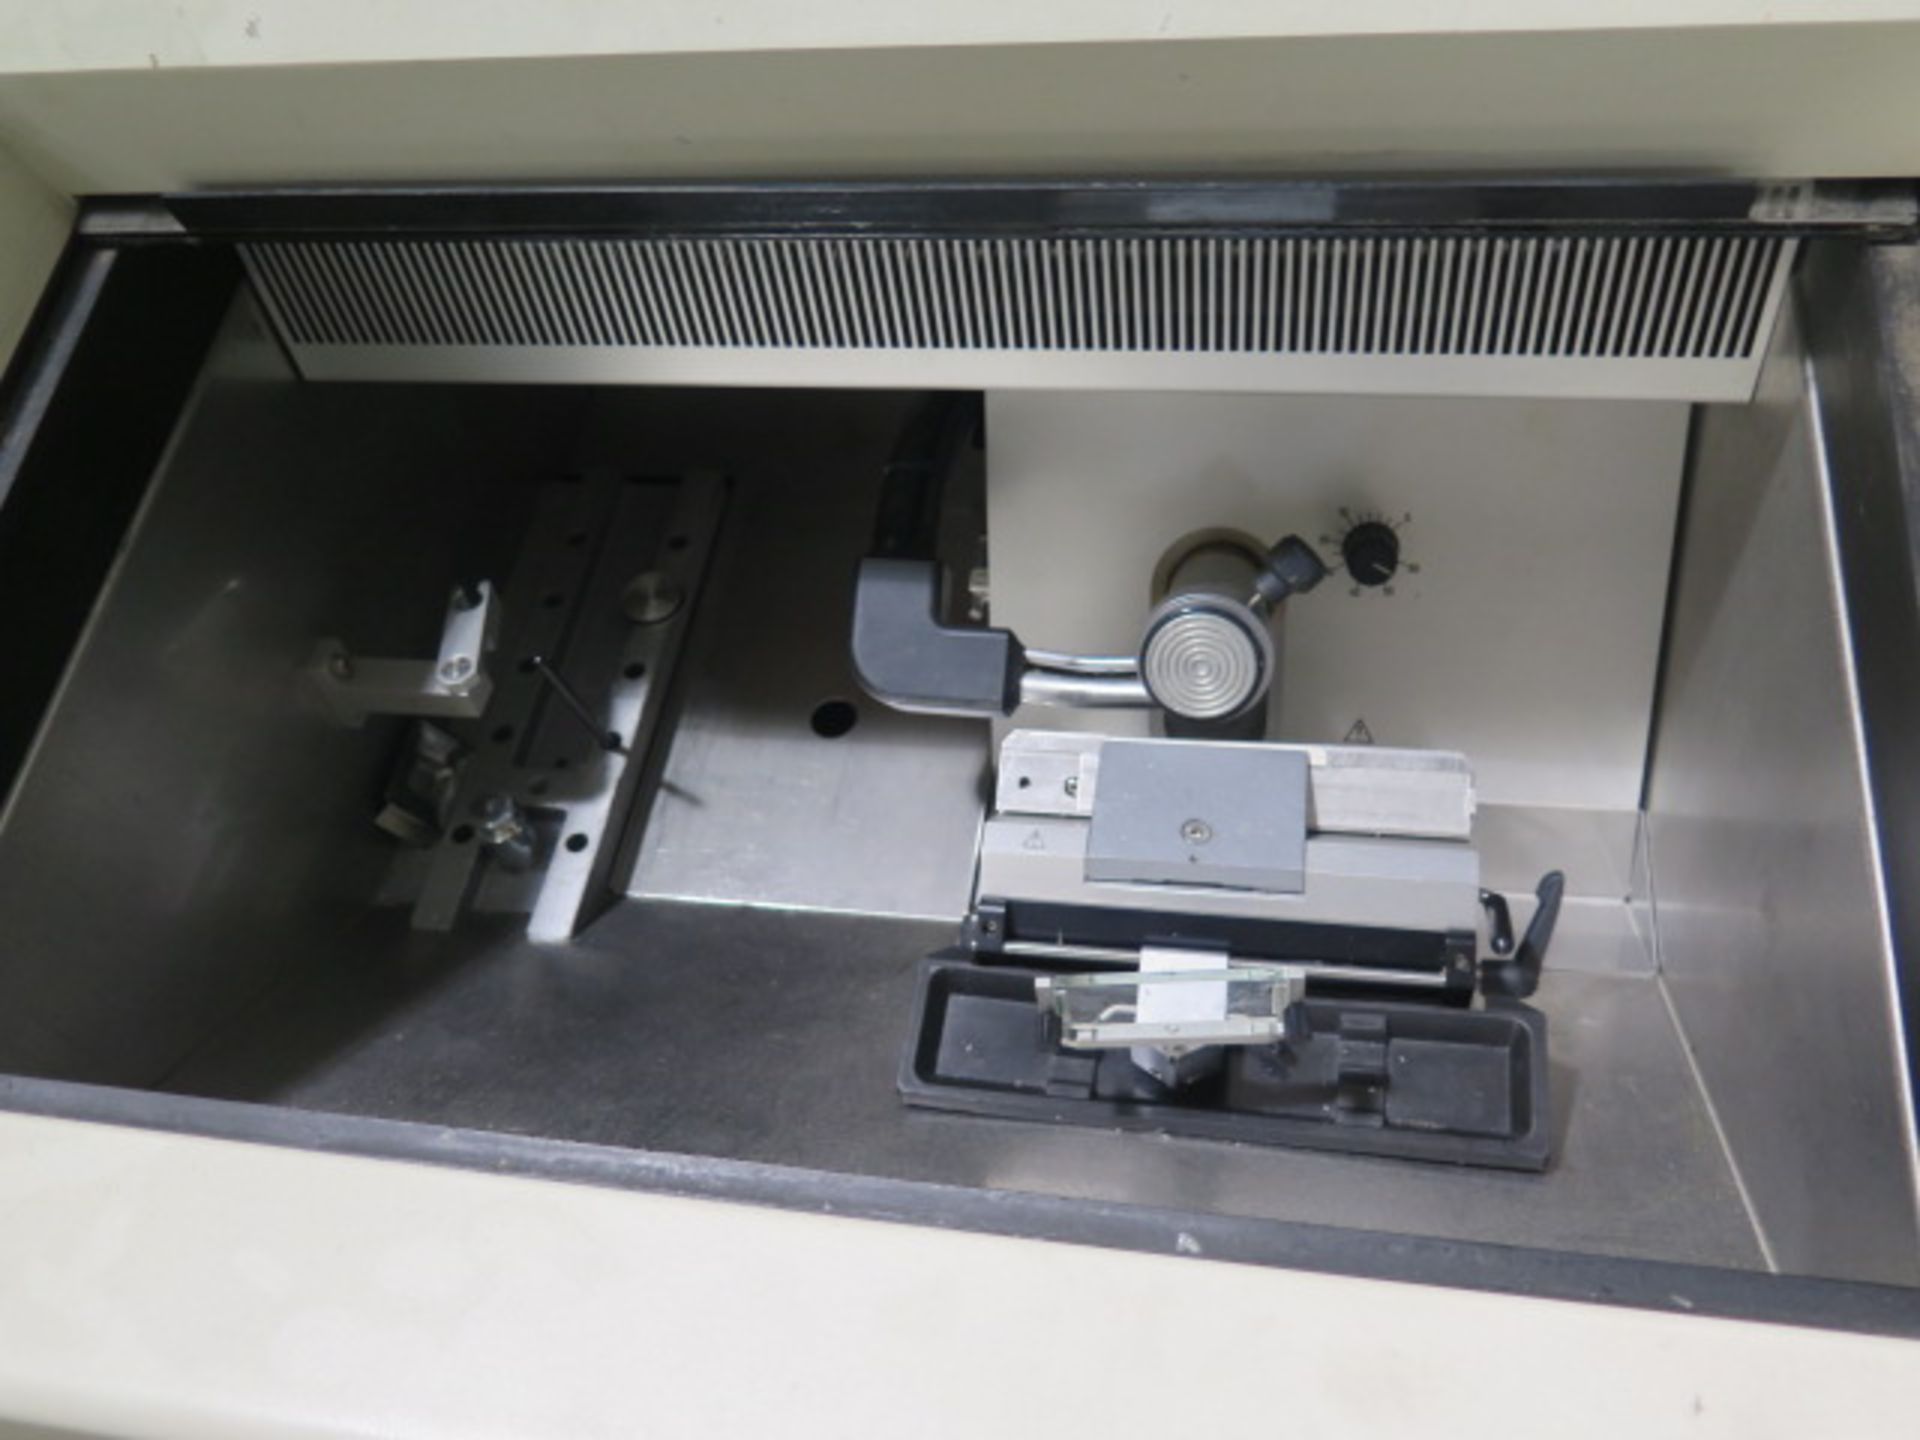 Leica CM1900-6-1 Refrigerated Microtome (SOLD AS-IS - NO WARRANTY) - Image 4 of 10